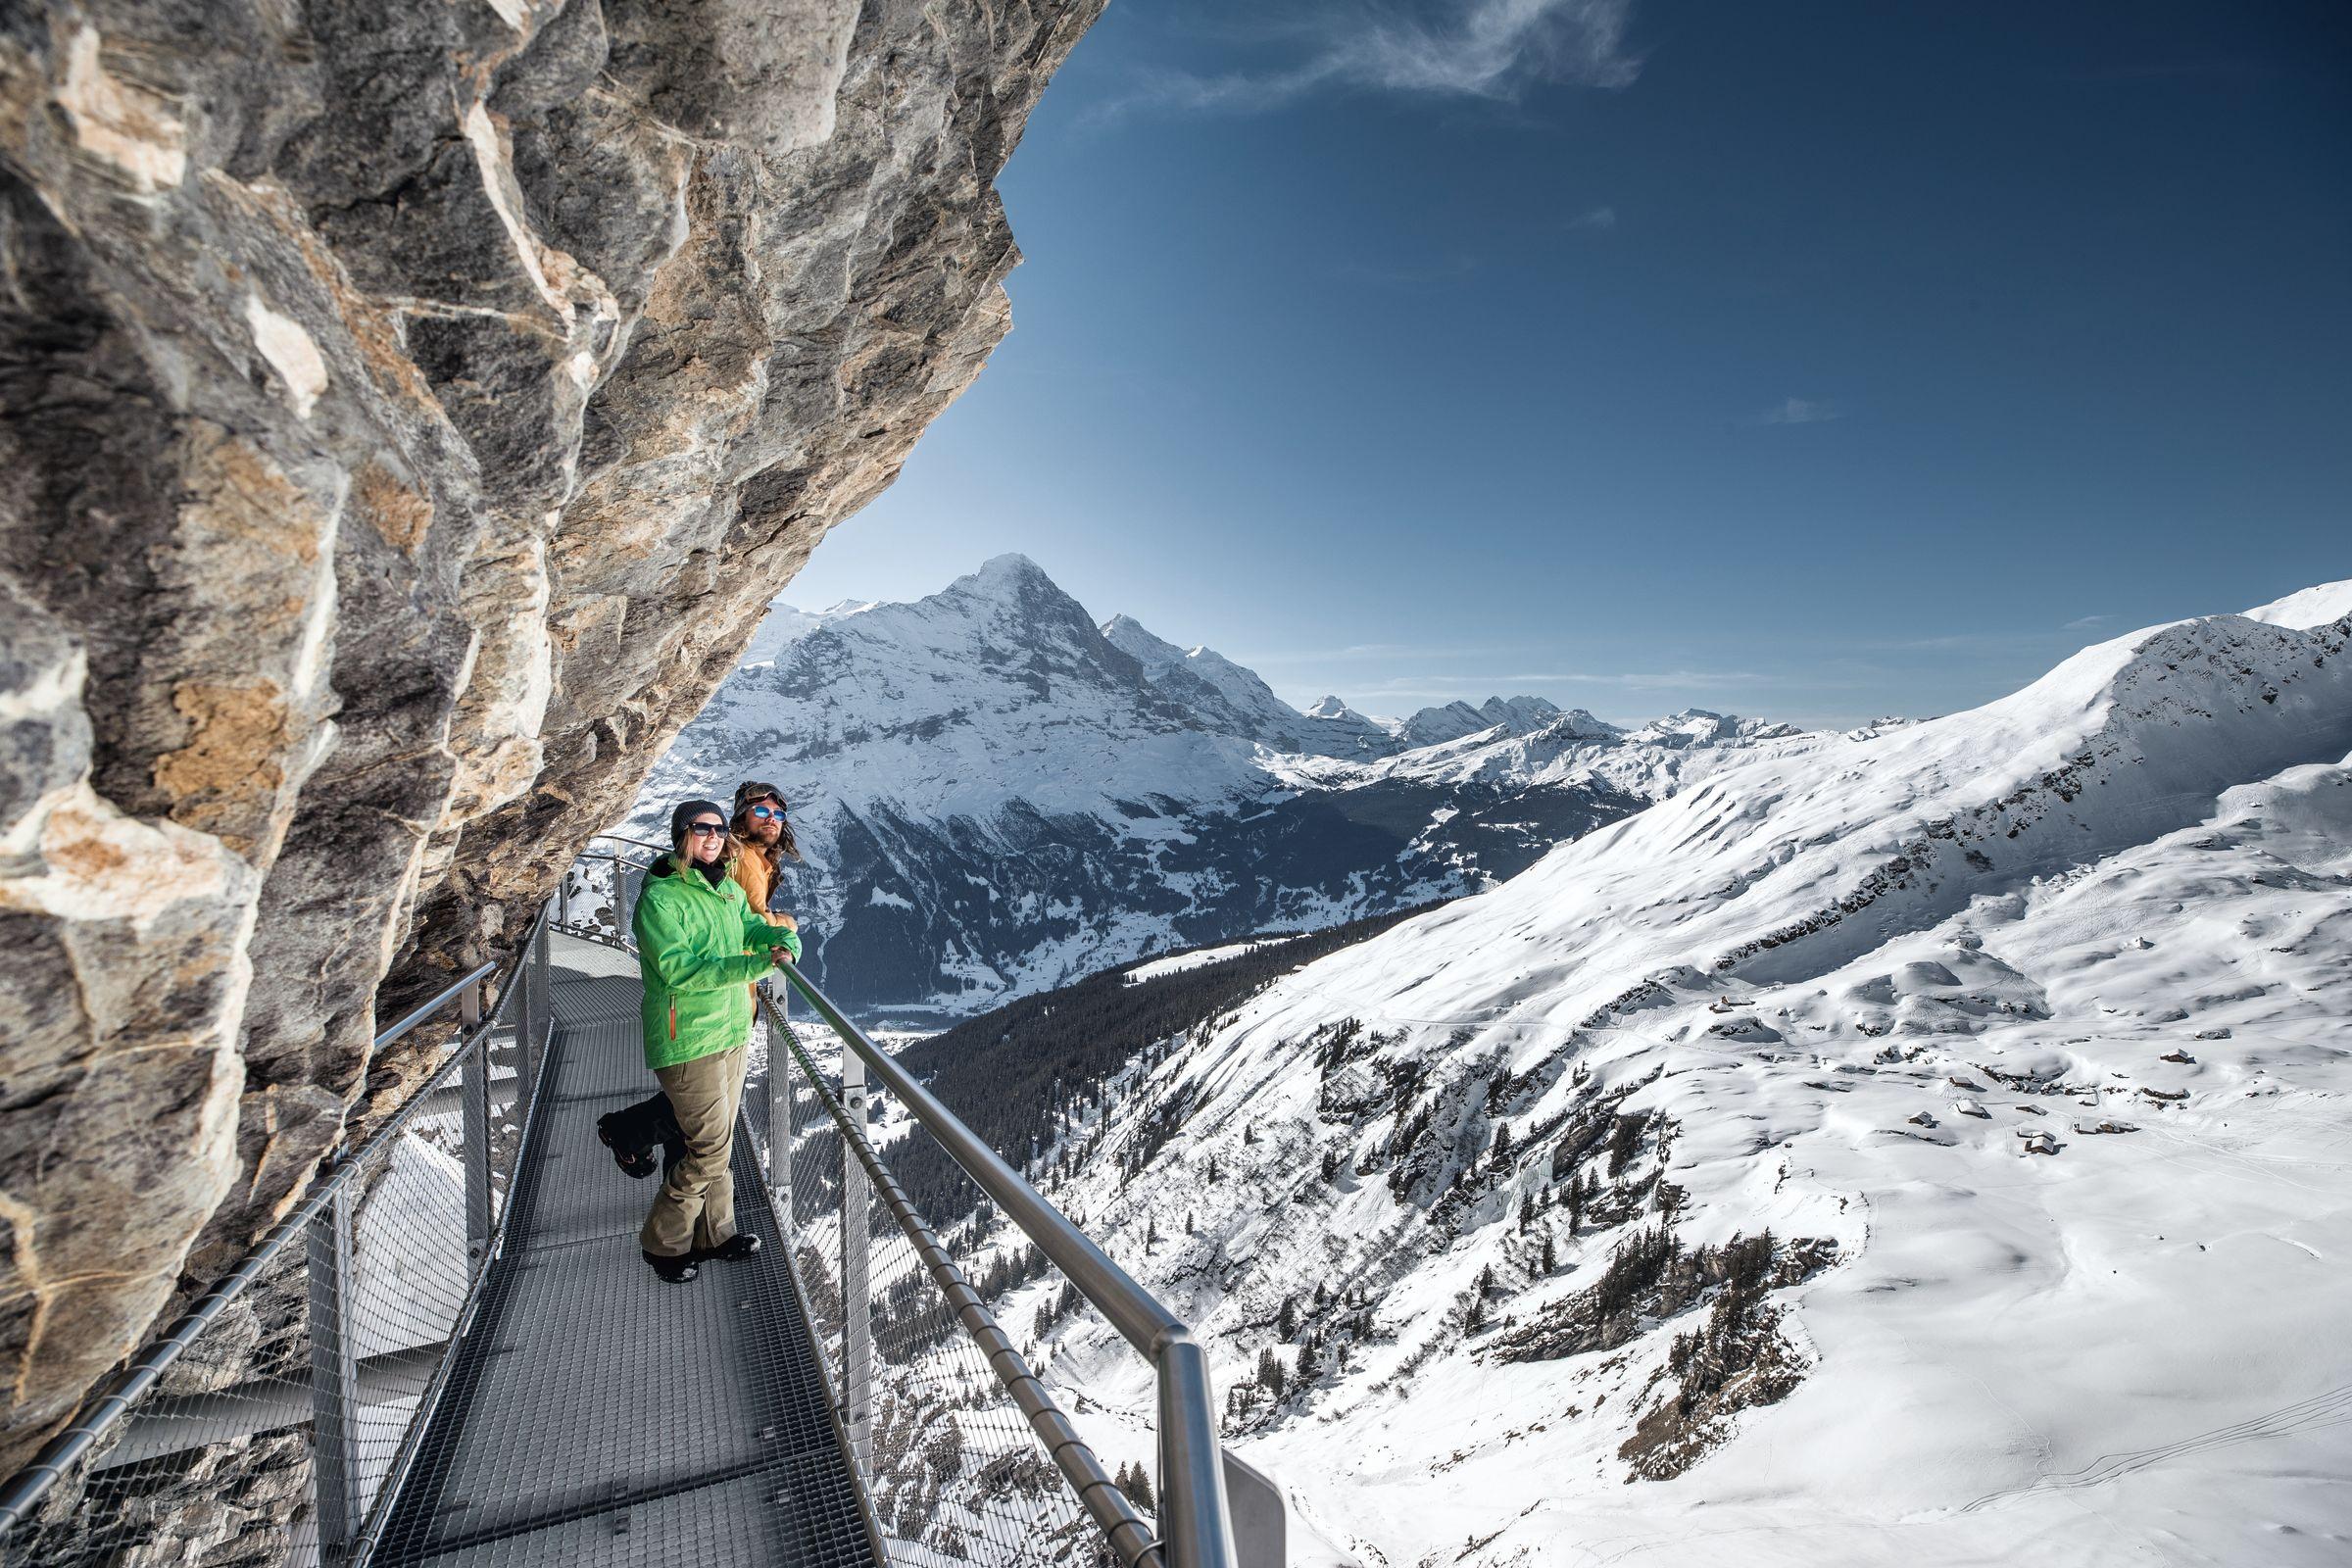 Two people stand on walkway, below cliff, looking at mountain scenery